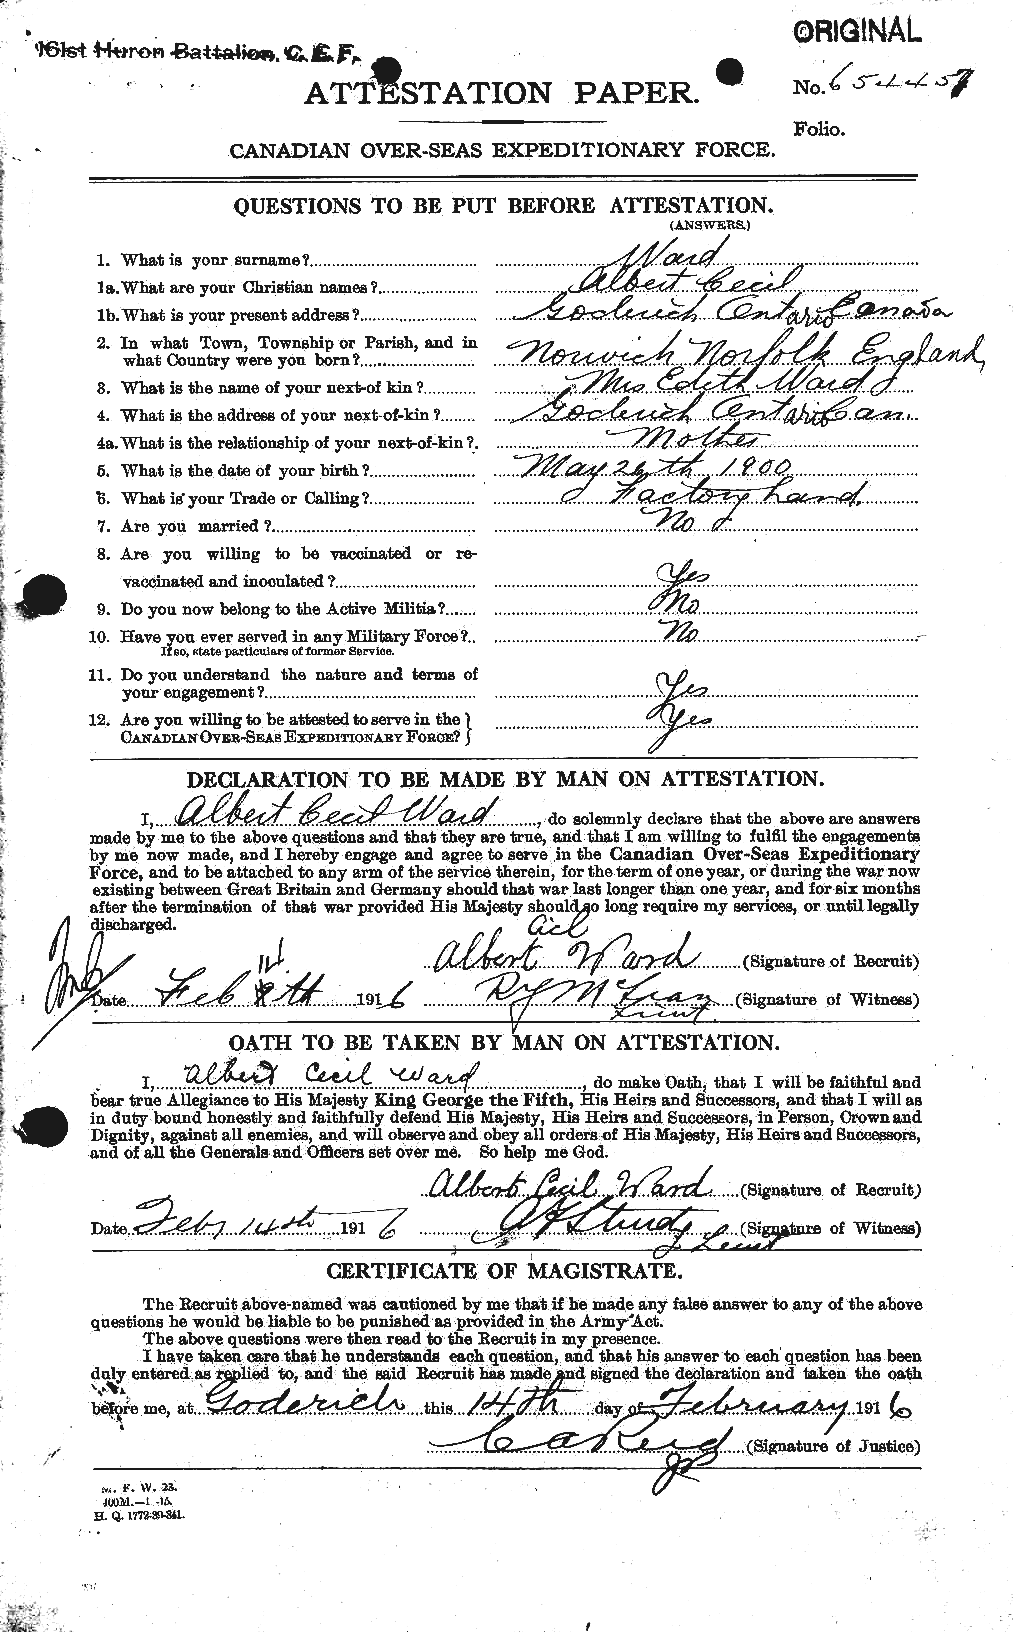 Personnel Records of the First World War - CEF 655090a